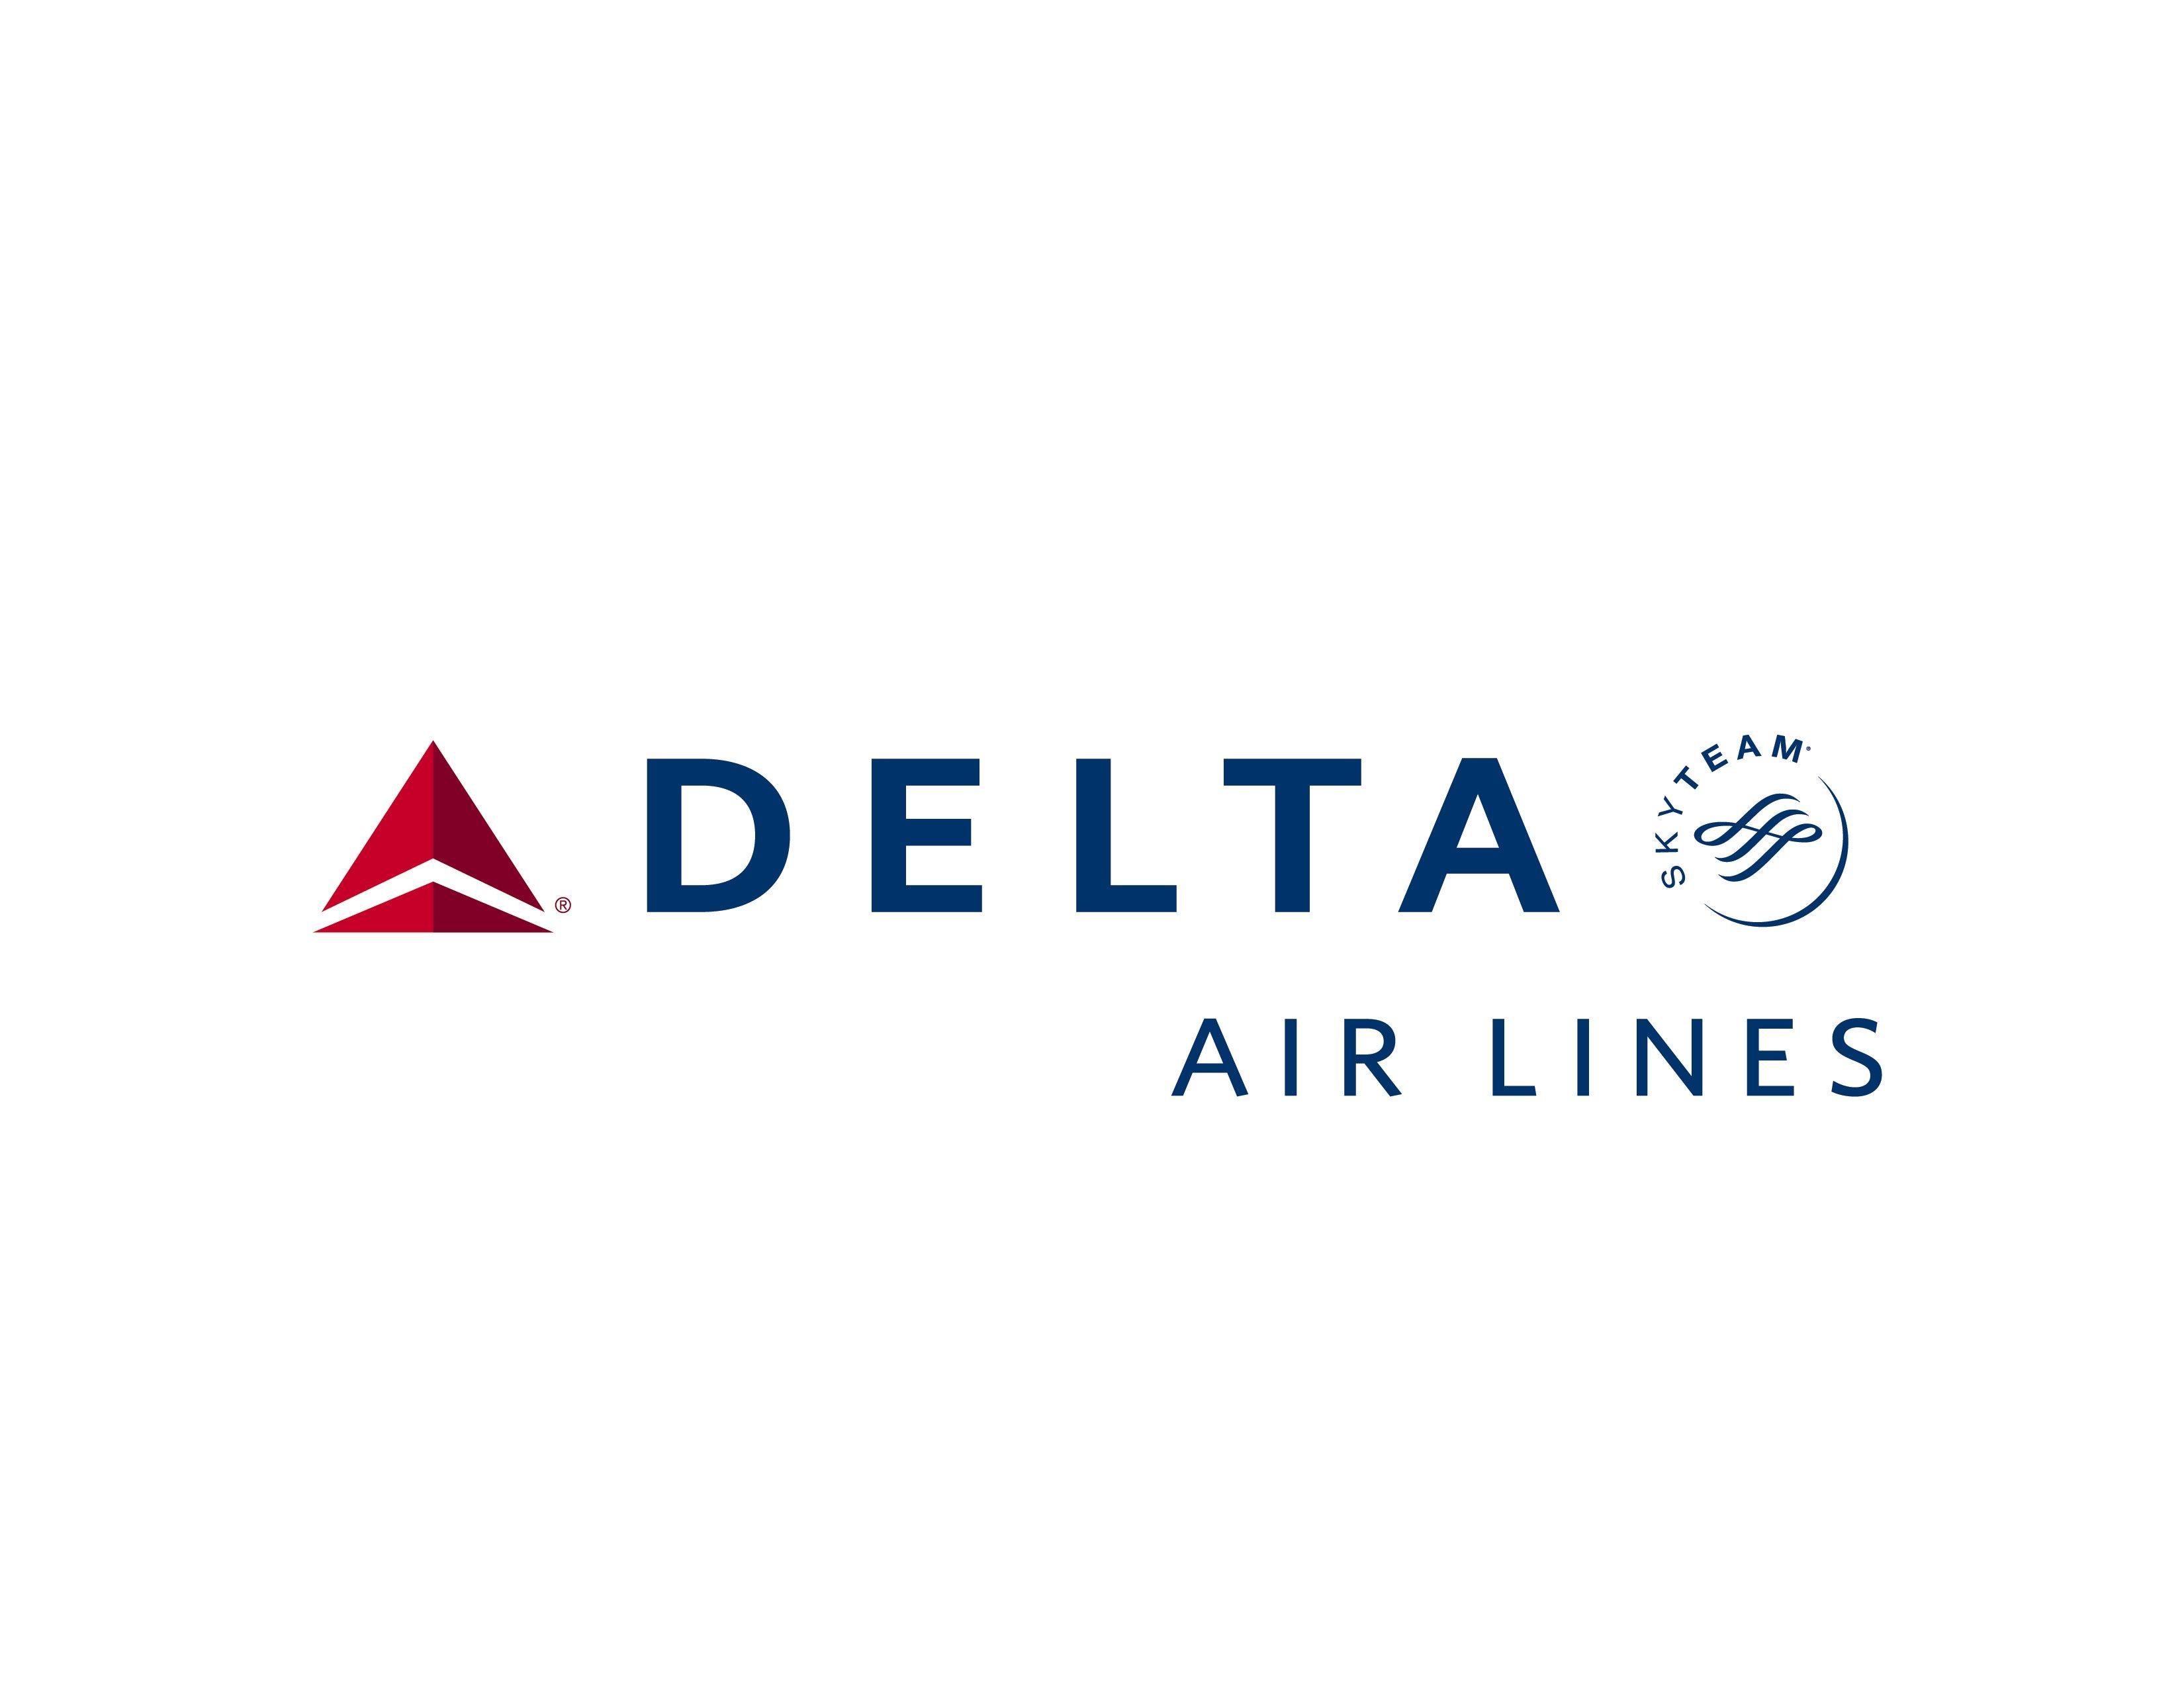 USA Airline Logo - Delta airlines Logos